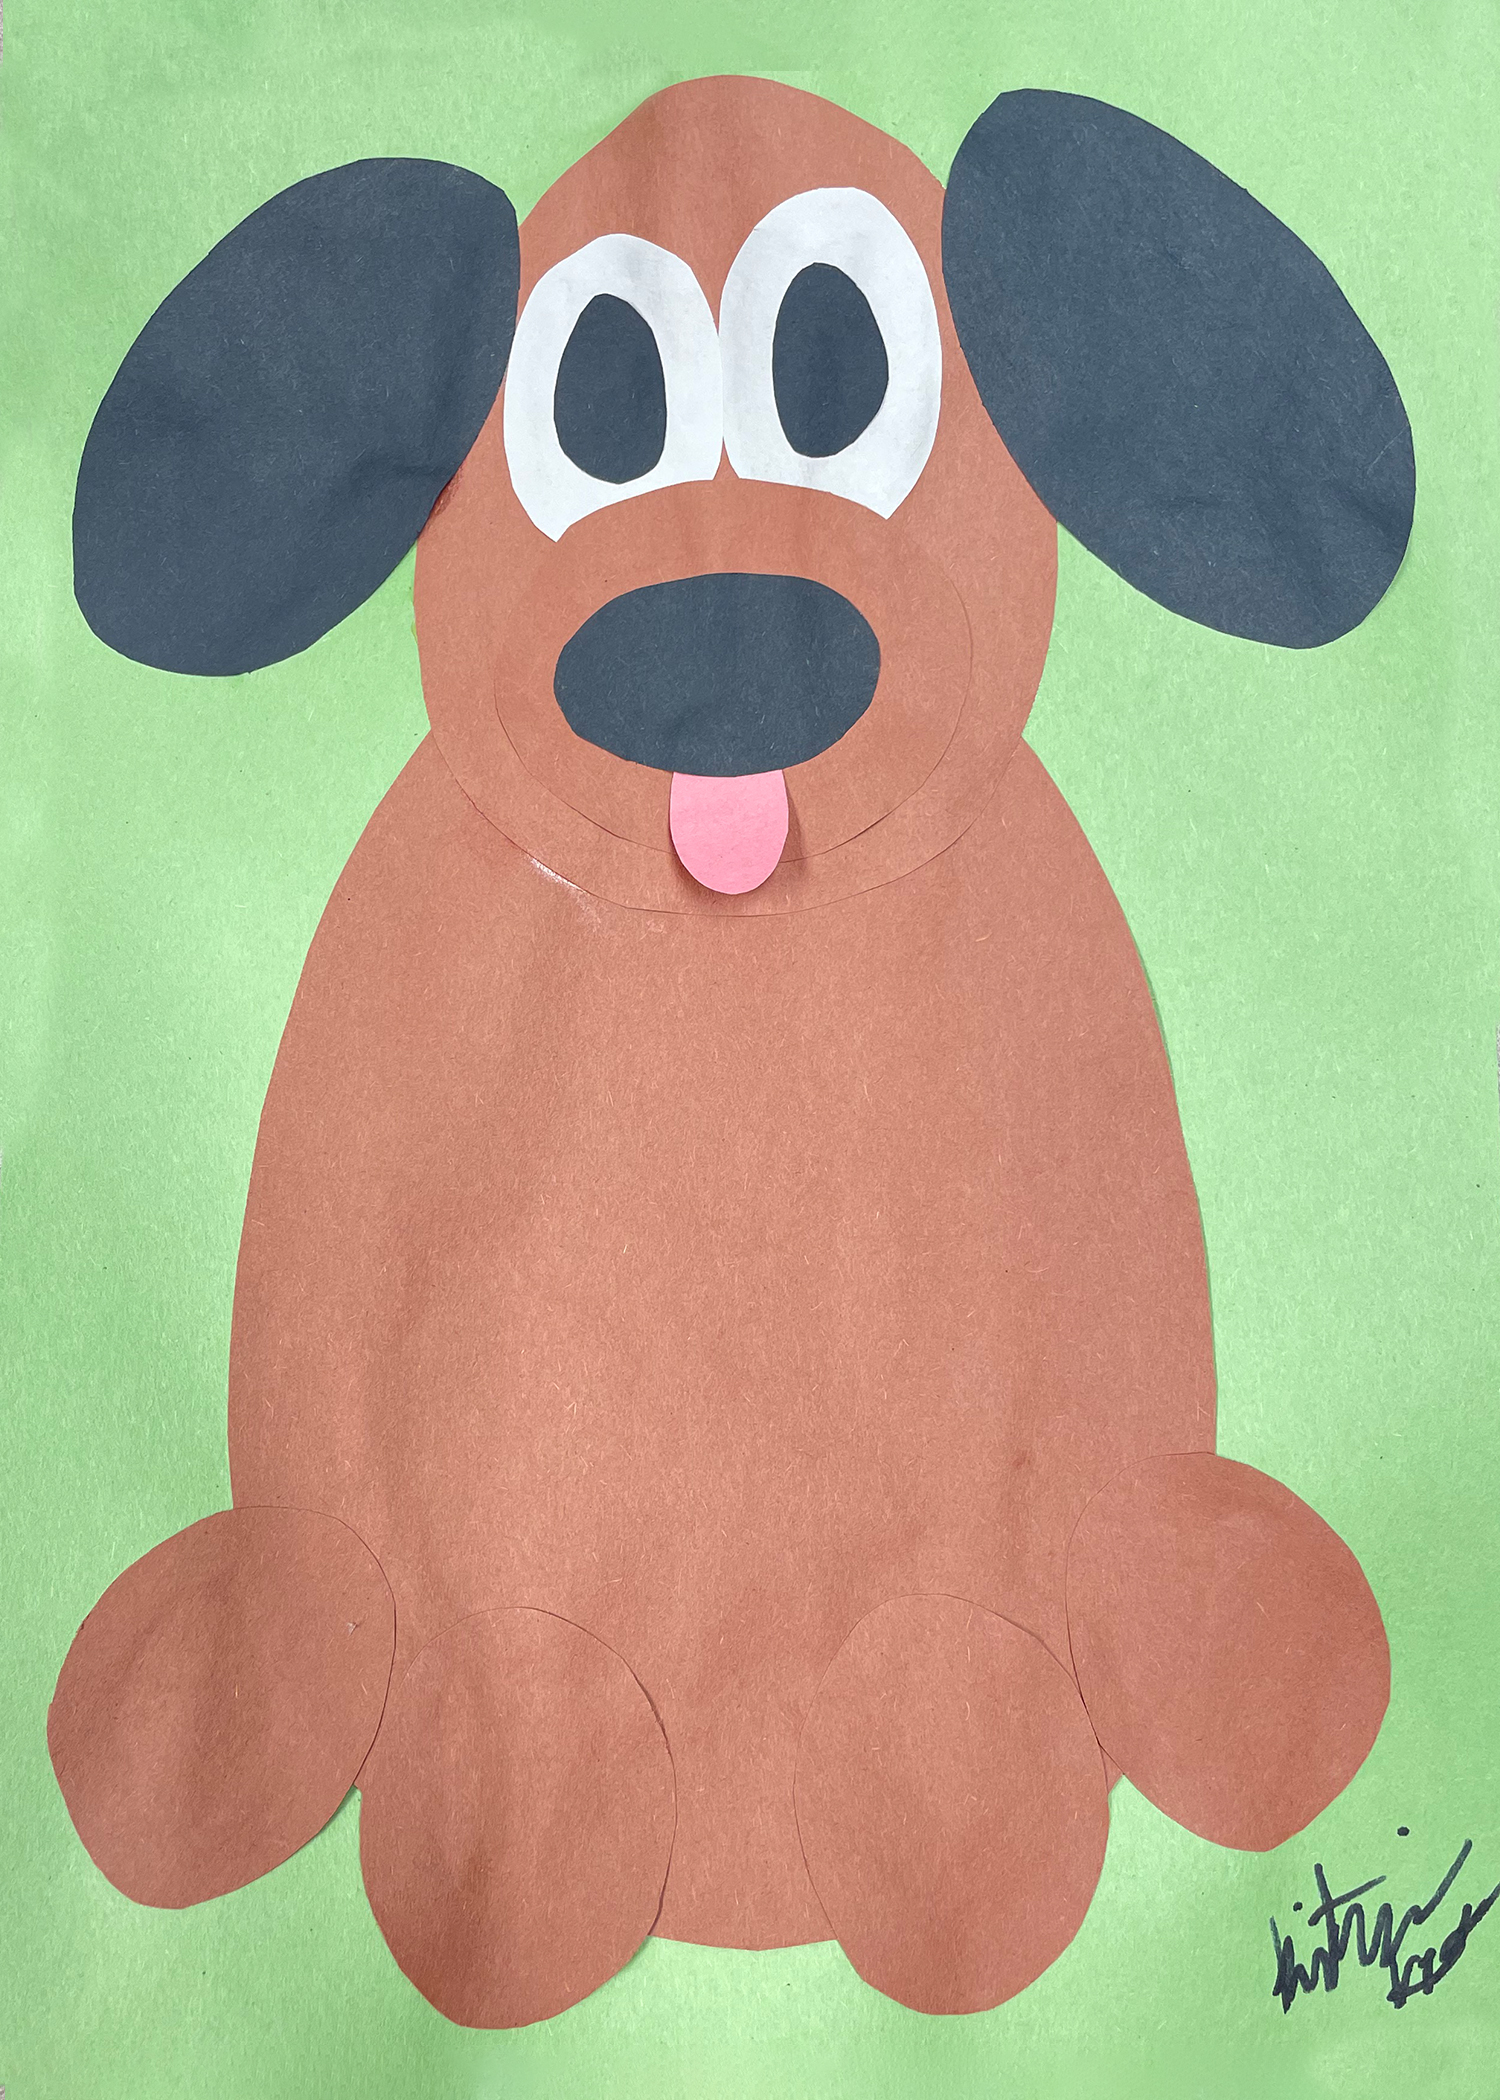 image of dog made with construction paper ovals